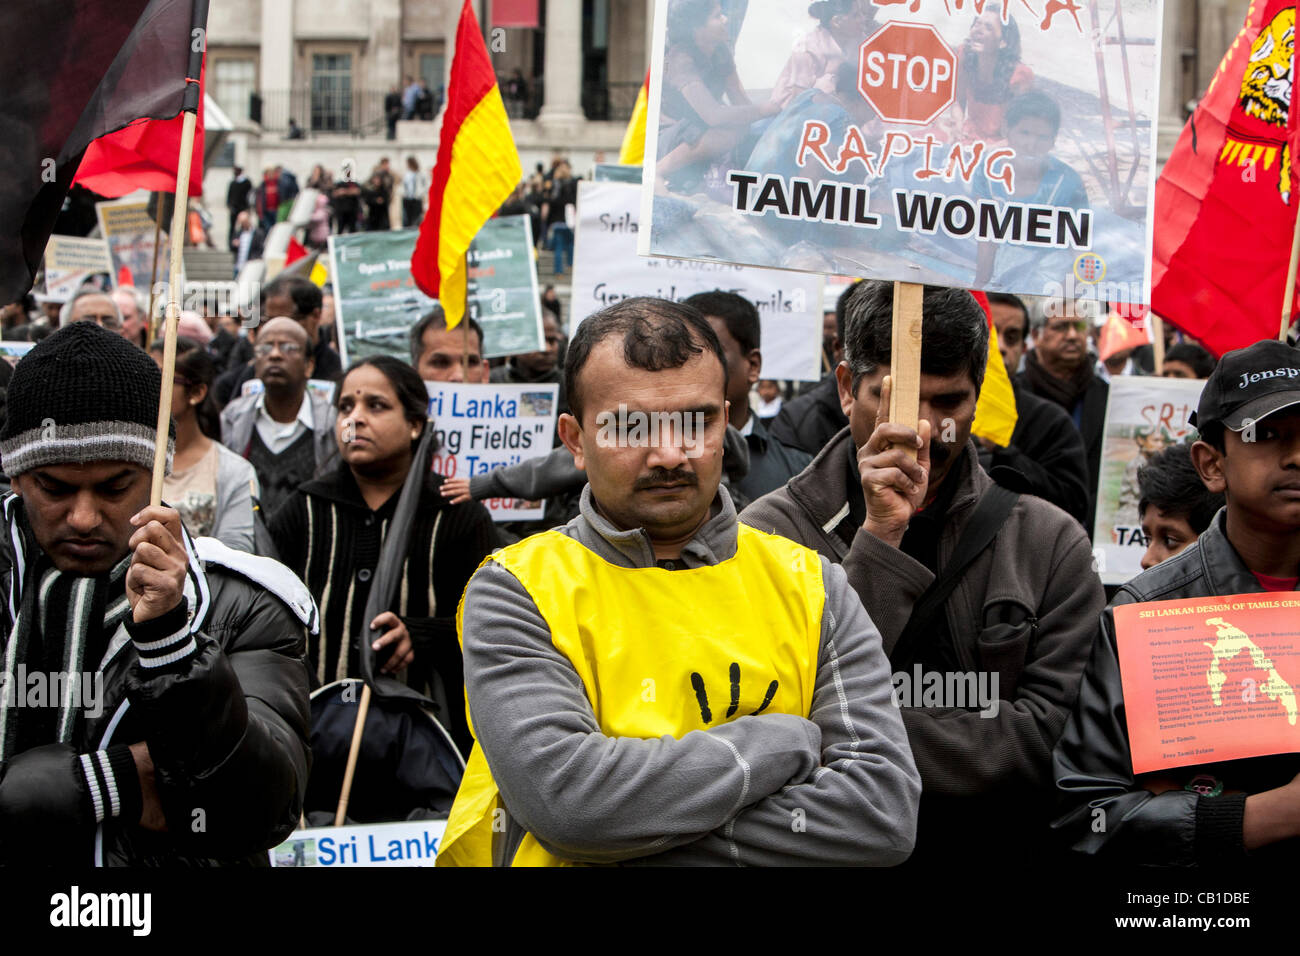 London, United Kingdom, 19/05/2012. Tamil protesters holding a minute silence during a rally where Tamils are demanding justice for the many people were killed in alleged war crimes during the civil war in 2009 Stock Photo